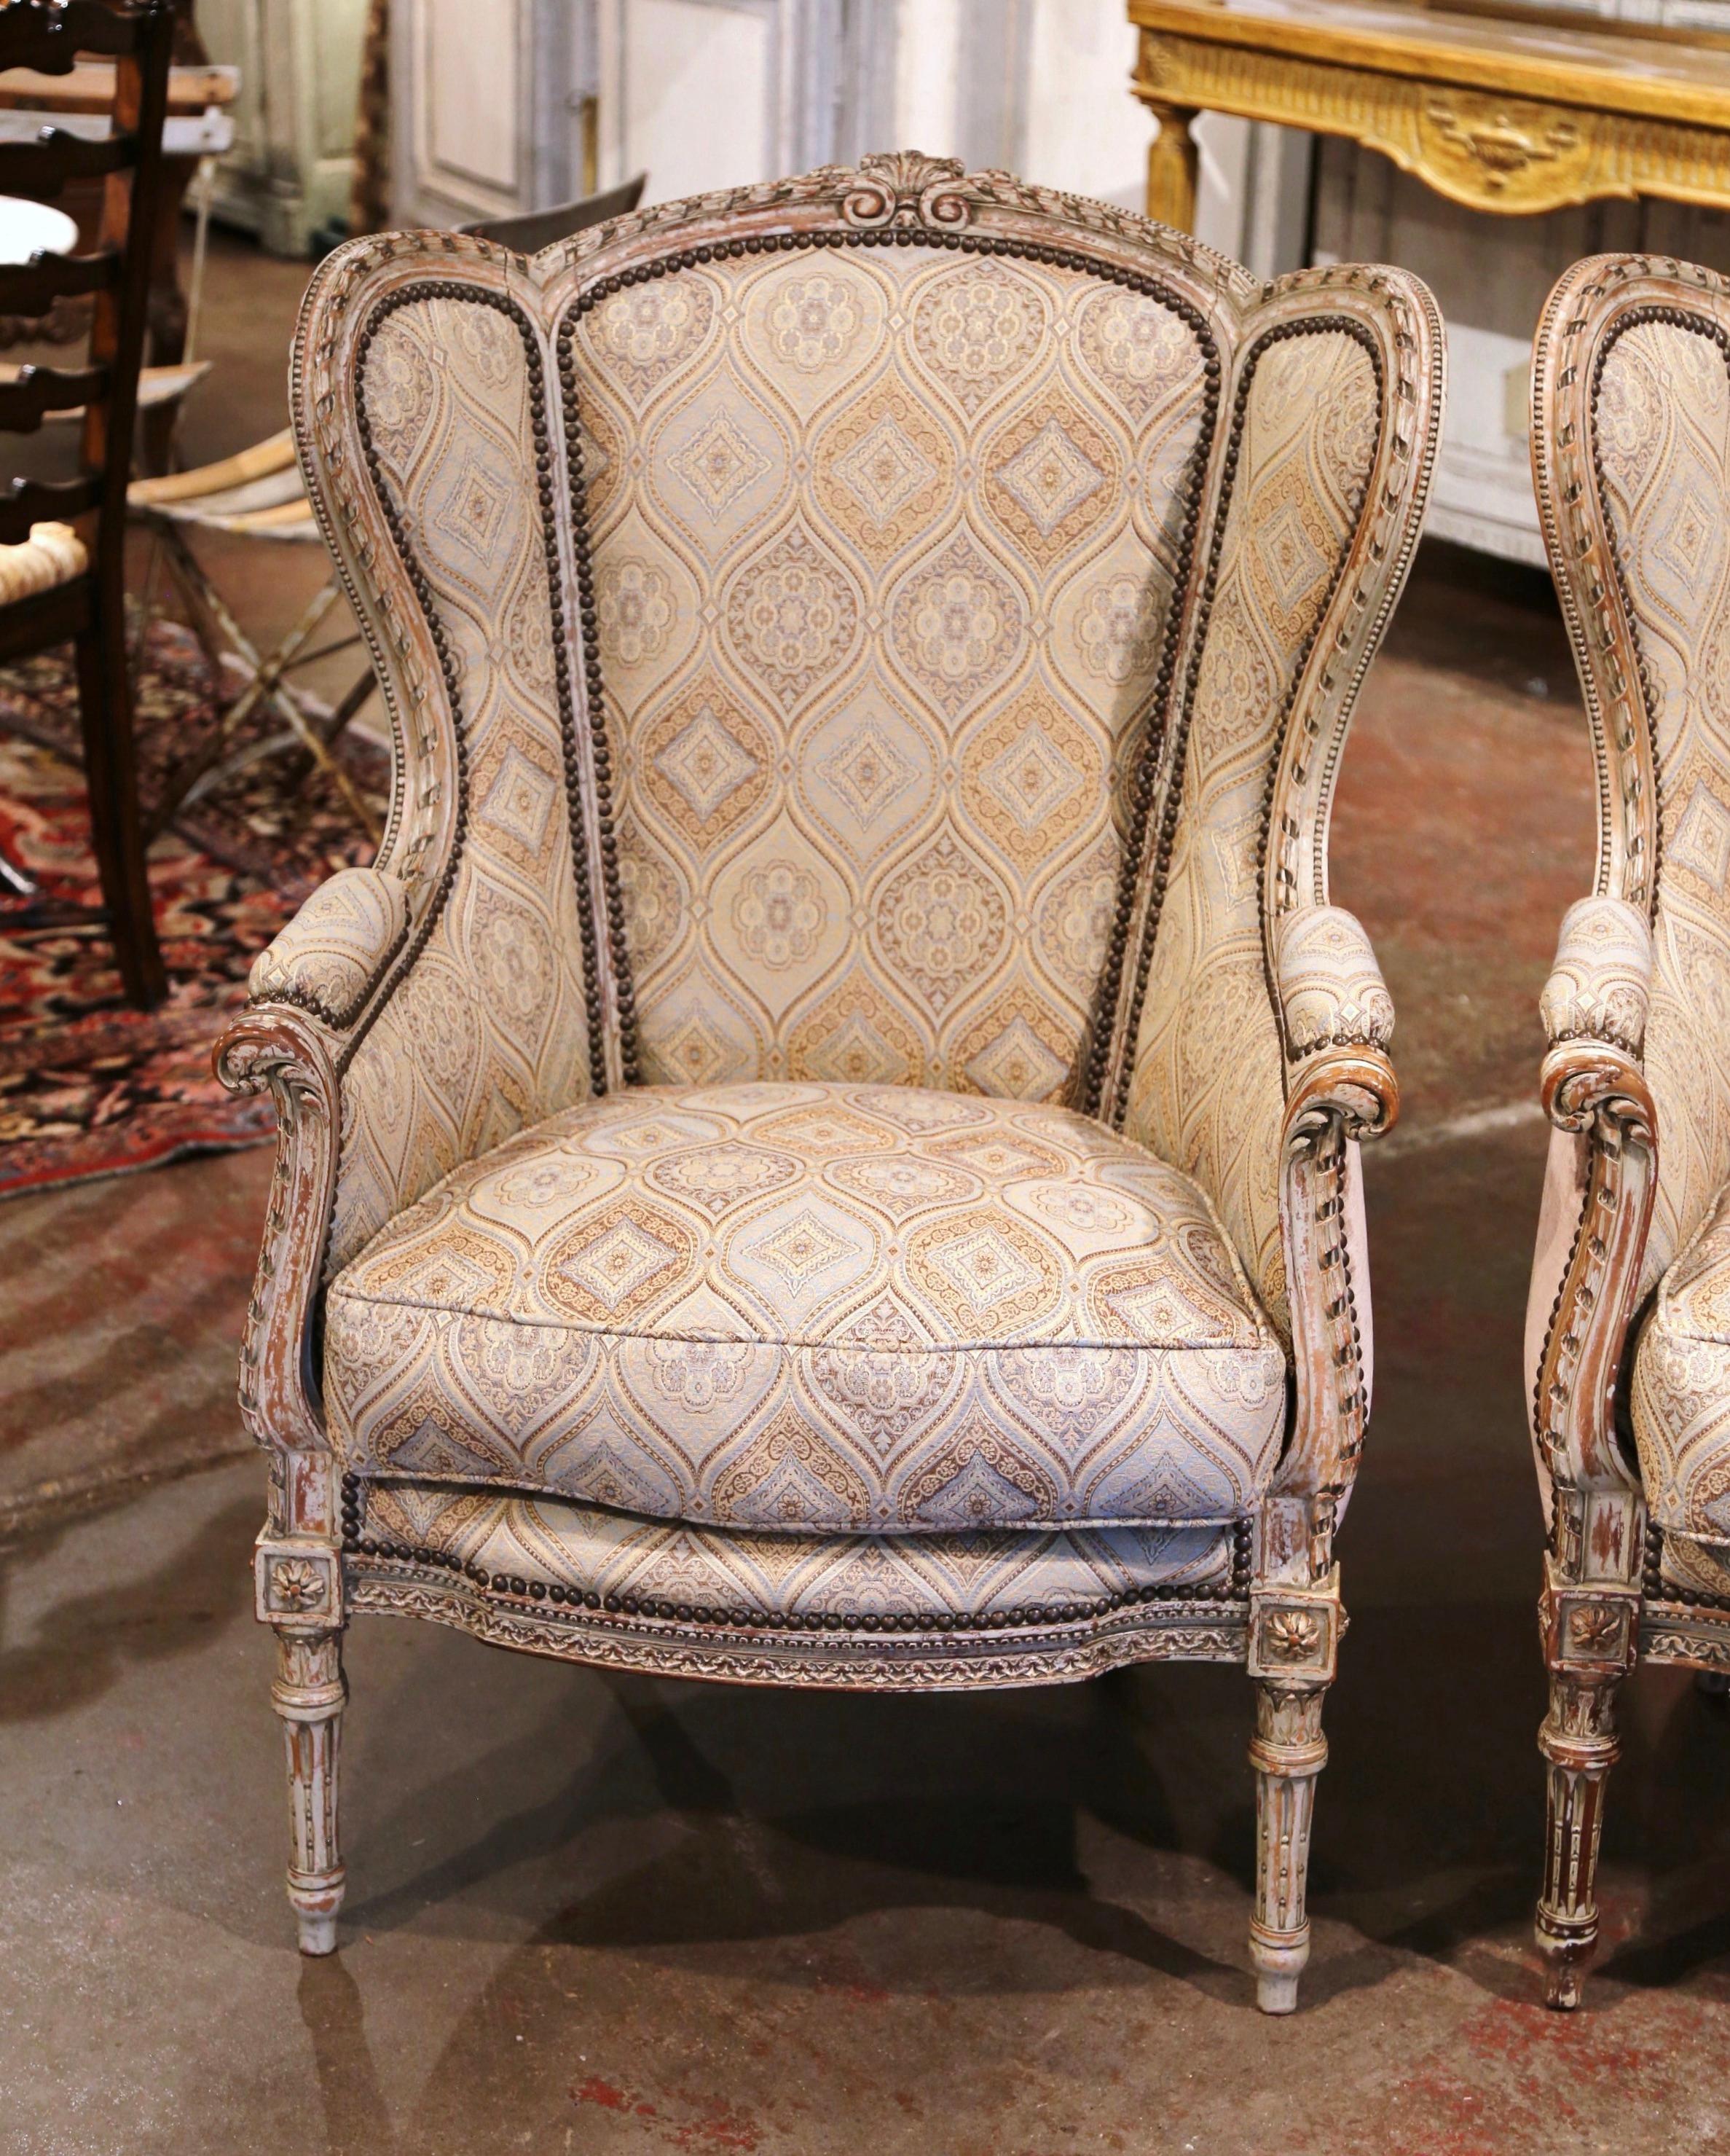 Dress a living room with this elegant pair of antique armchairs. Crafted in France circa 1870, each 